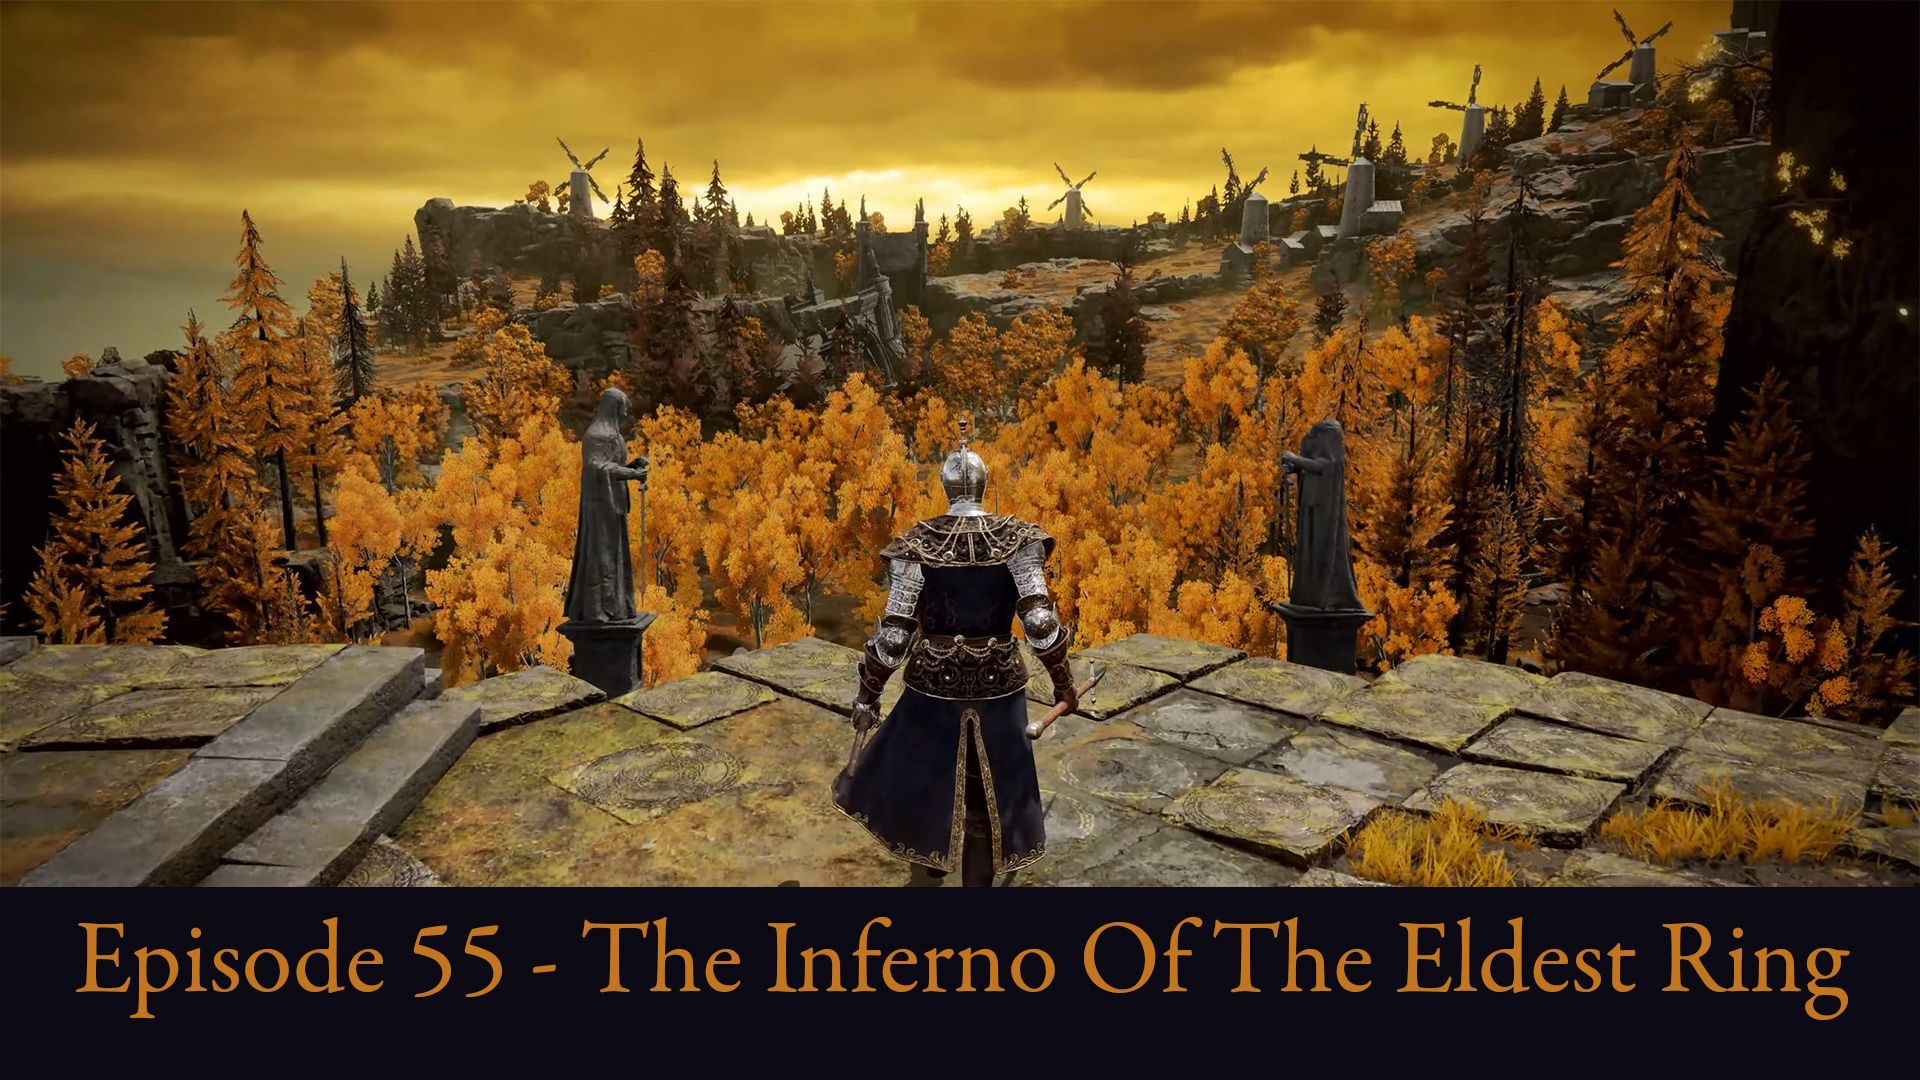 Episode 55 - The Inferno Of The Elden Ring